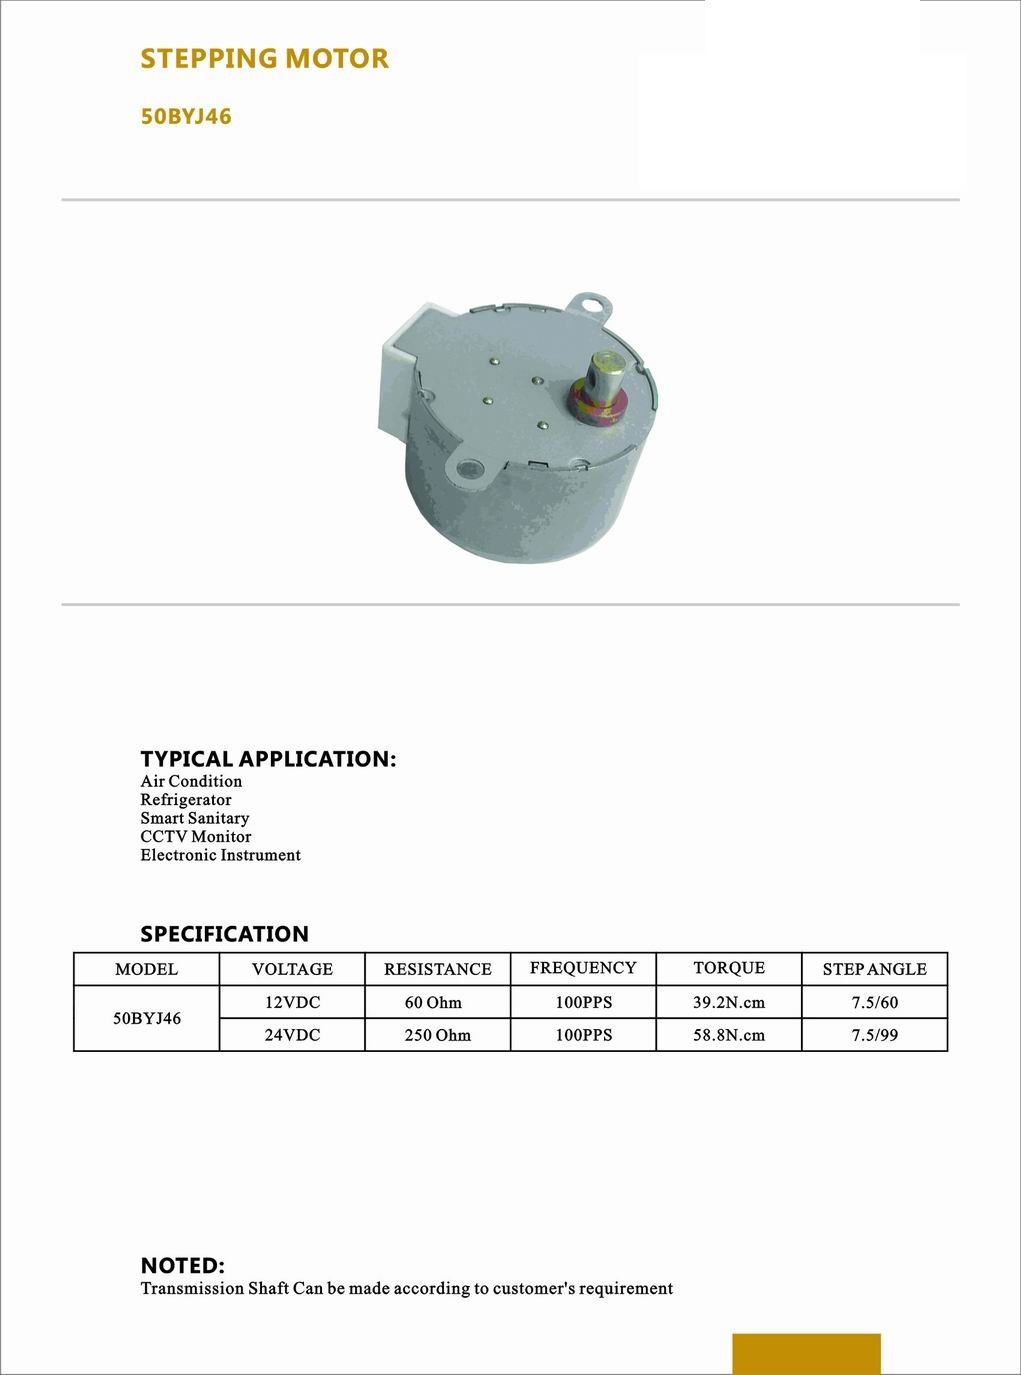 Home Appliance Electrical Motor for Air Conditioner